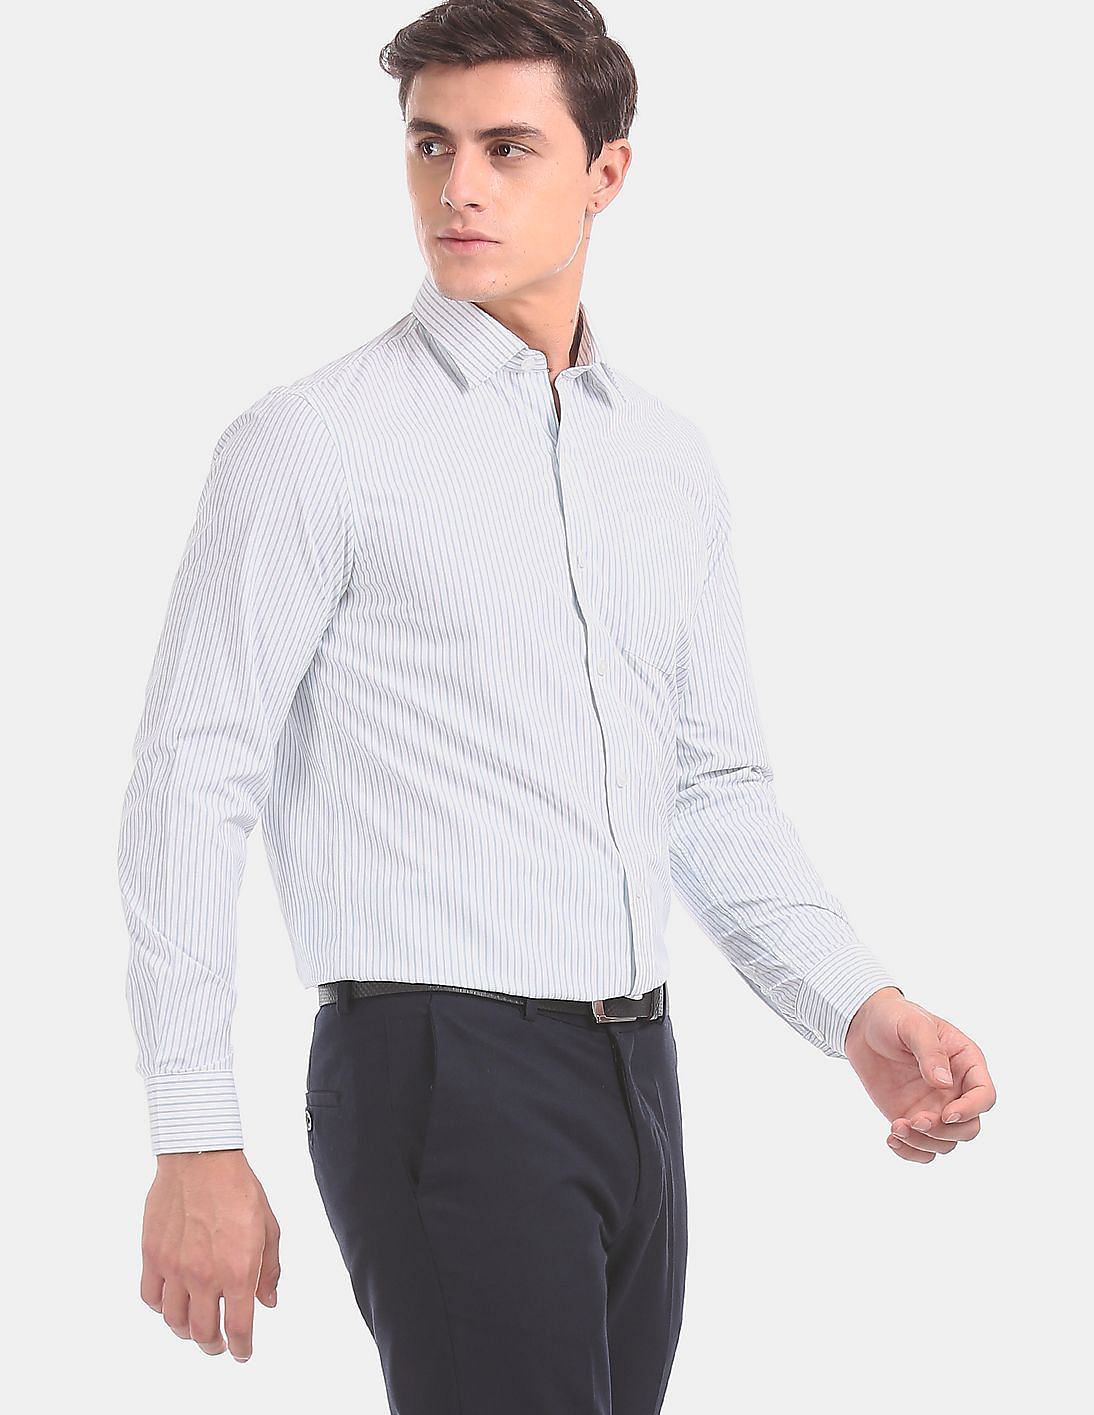 Buy Excalibur White And Teal Mitered Cuff Striped Formal Shirt - NNNOW.com